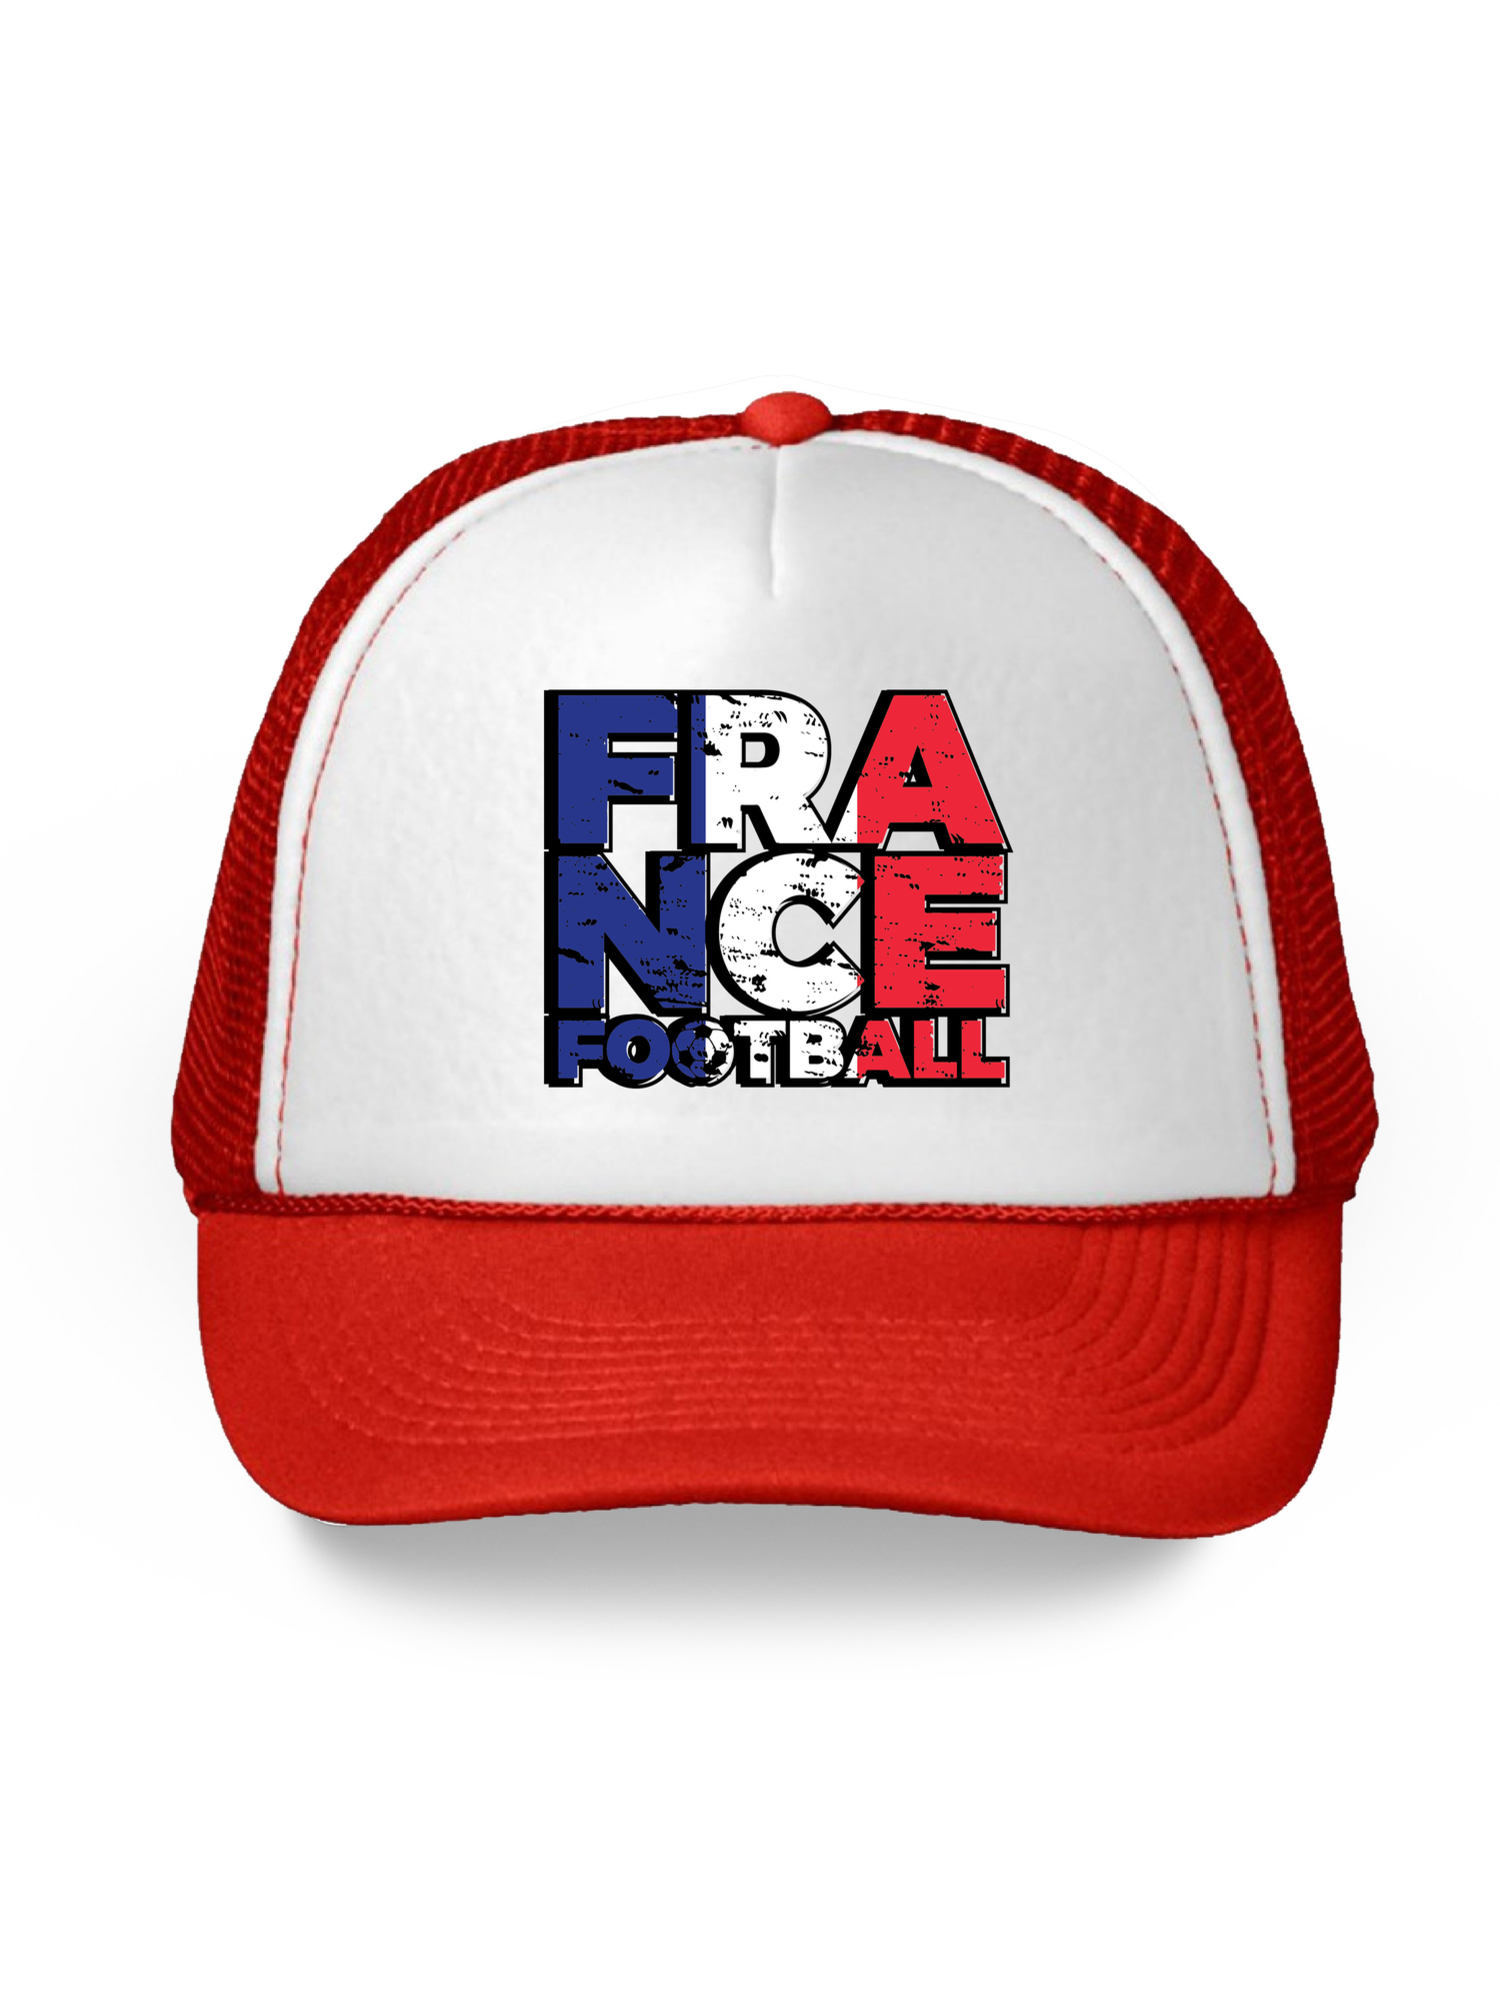 Awkward Styles France Football Hat France Trucker Hats for Men and Women Hat Gifts from France French Soccer Cap French Hats Unisex France Snapback Hat France 2018 Trucker Hats France Soccer Hat - image 1 of 6